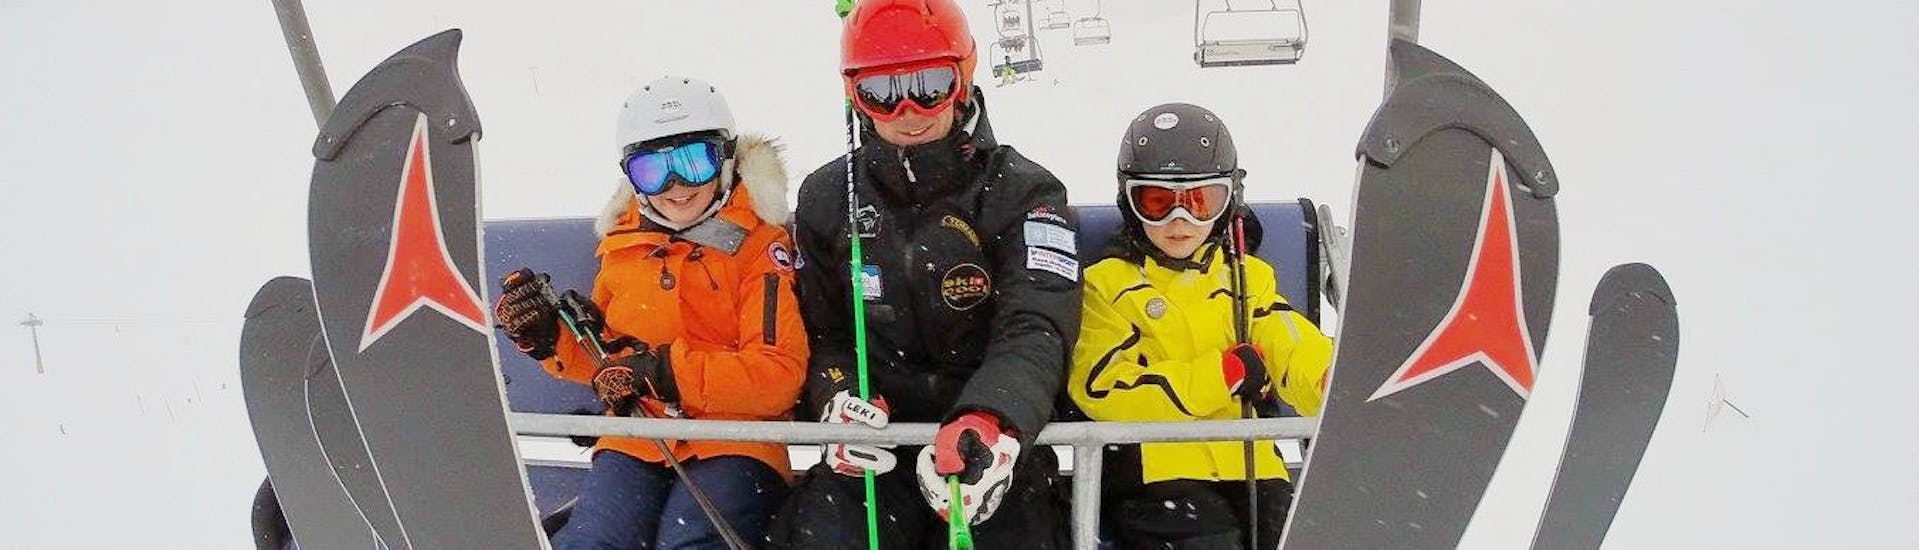 Instructor and students sitting in a chairlift during the Kids Ski Lessons (5-15 y.) for Experienced Skiers with Ski Cool St. Moritz.